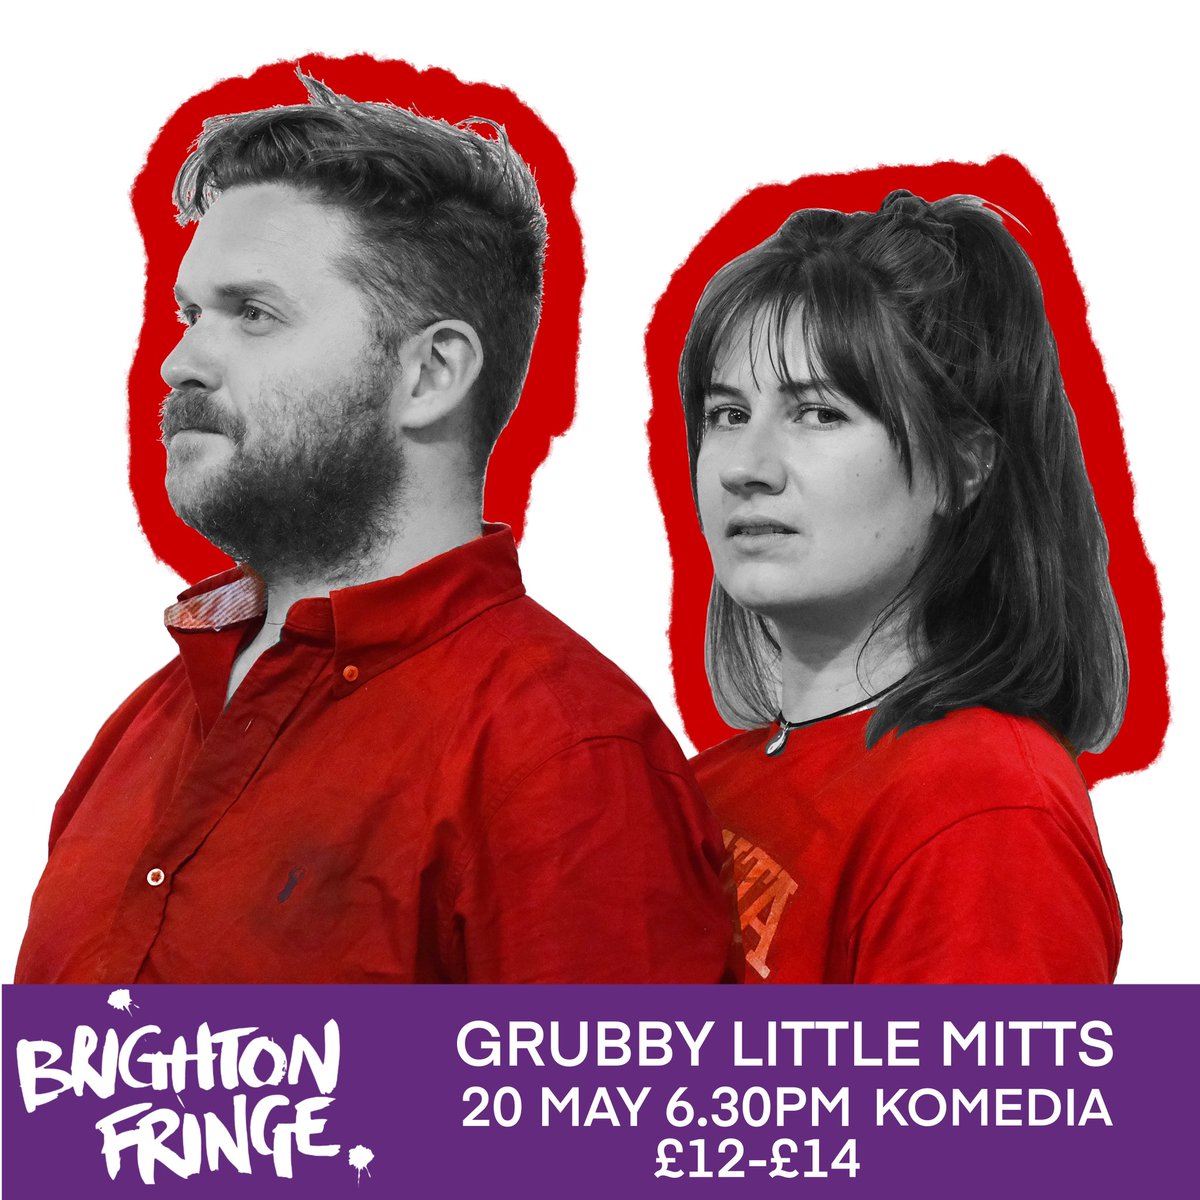 Last round of our debut show in #Brighton today! 

See you at 6.30pm at @KomediaBrighton @brightonfringe 🎉 

Tickets: komedia.co.uk/brighton/brigh…

#brighton #brightonfringe #visitbrighton #whatsonbrighton #brightonandhove